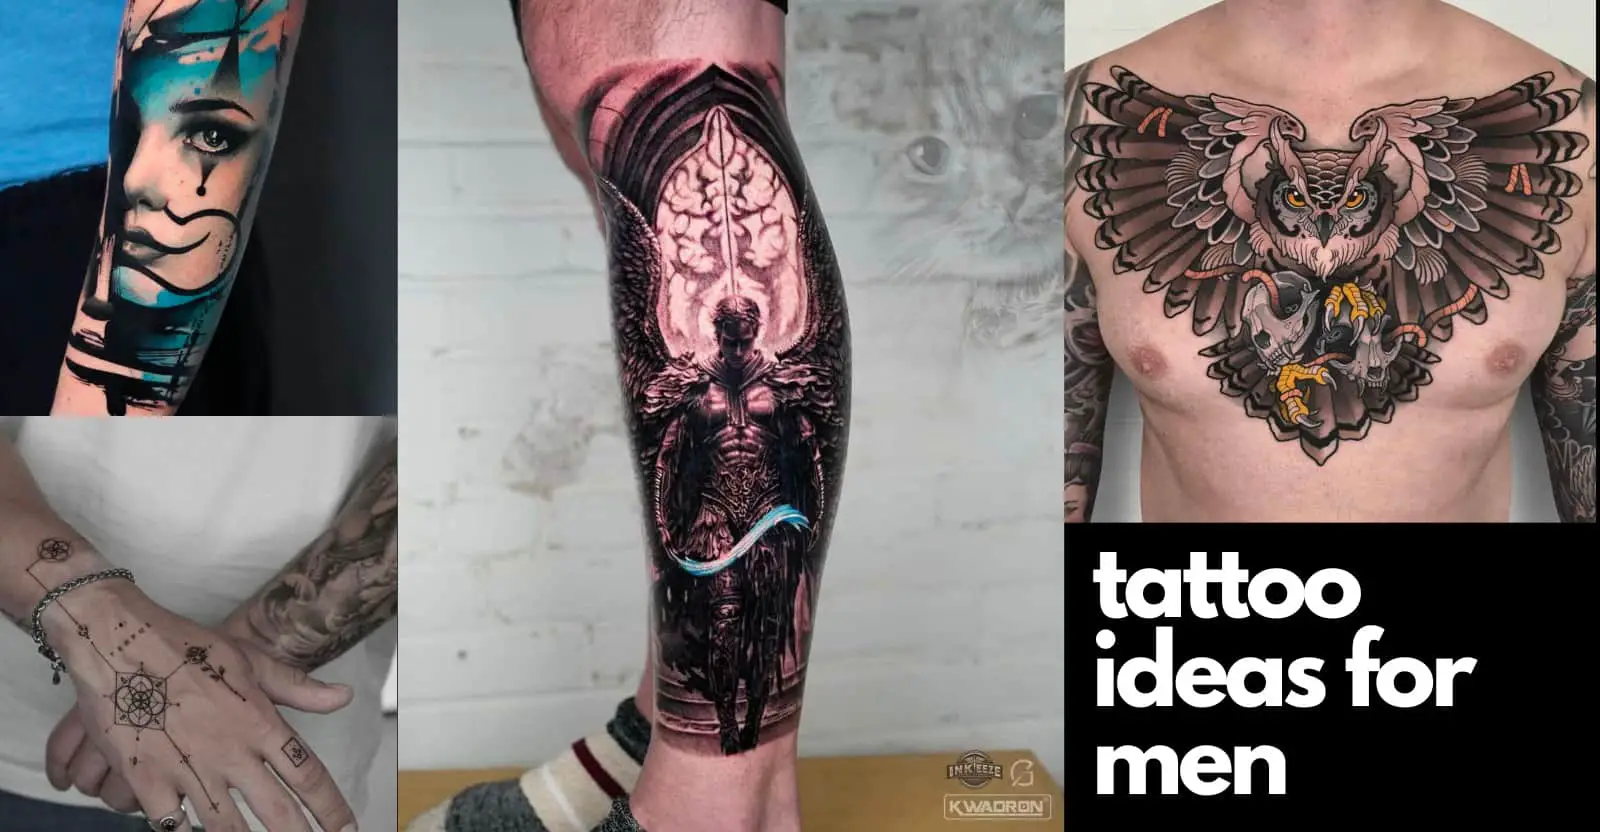 How Tattoo-Ready Are You?